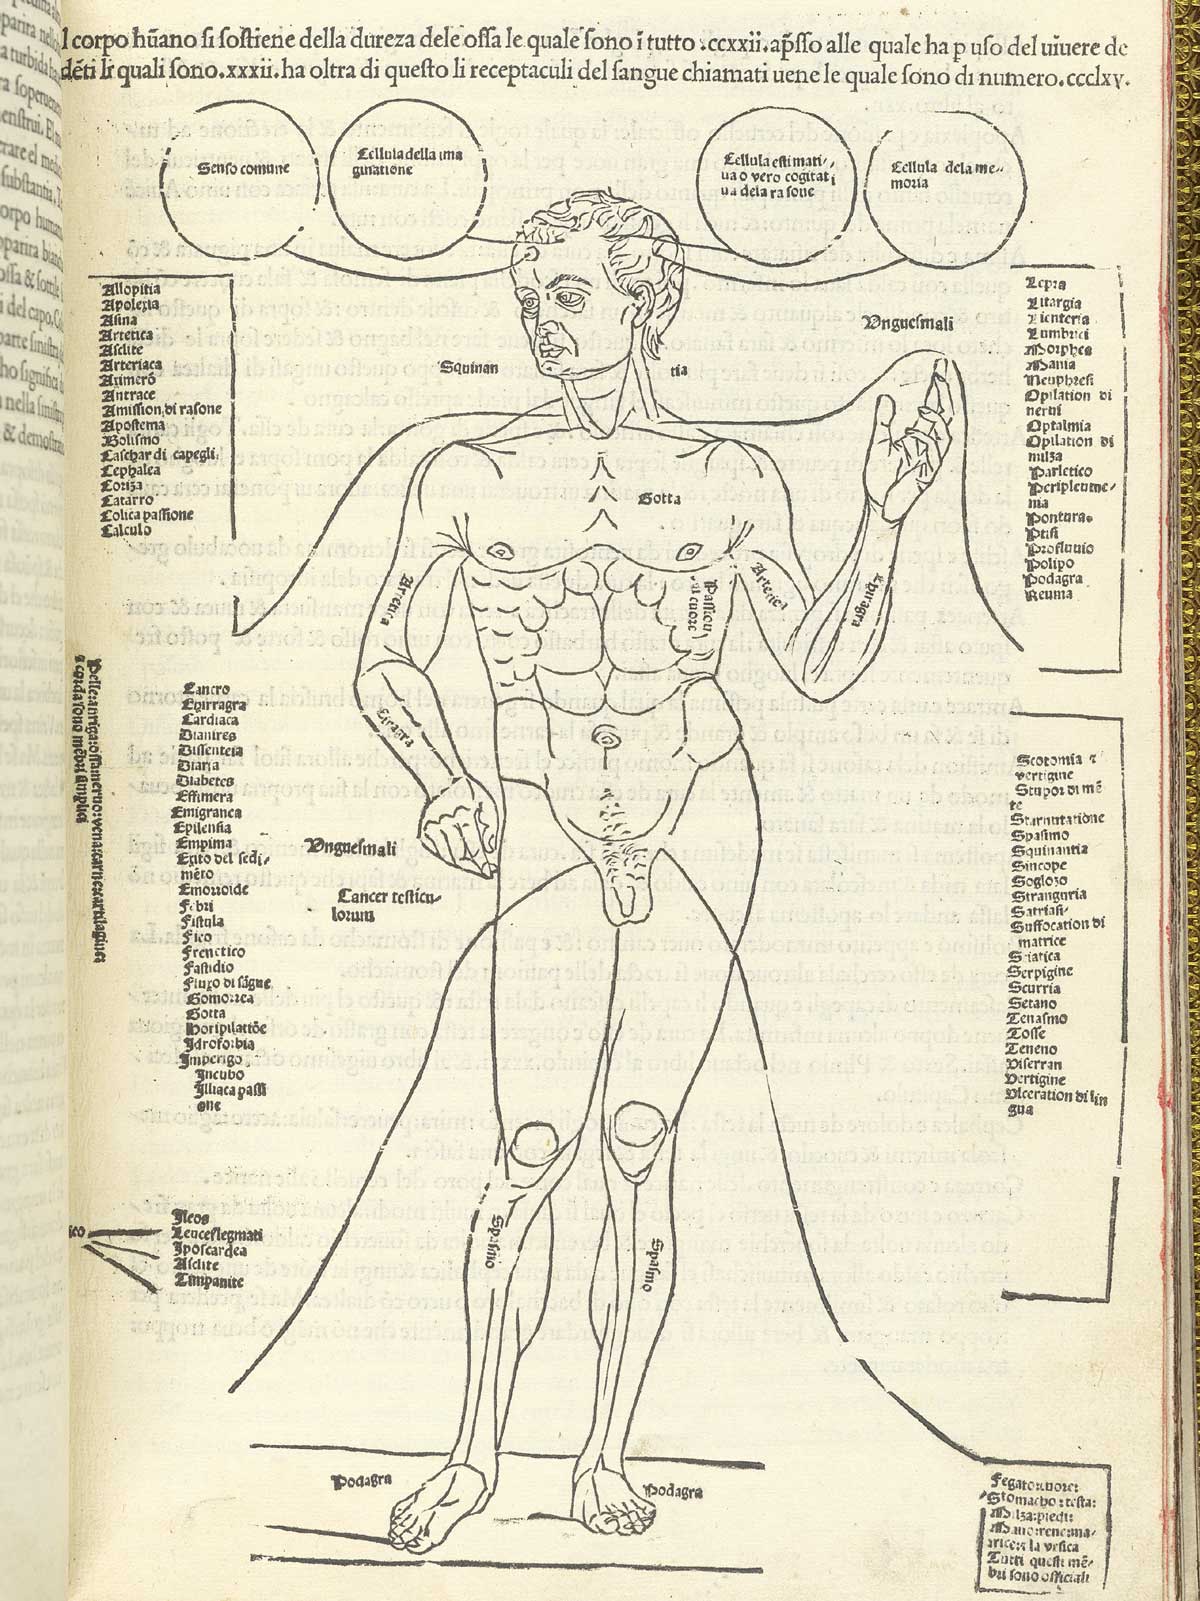 Page 7 of Johannes de Ketham's Fasiculo de medicina featuring the disease man. This drawing serves as a diagram of the diseases that affect different parts of the body and is a famous example of Renaissance anatomical realism. Four columns on either side of the figure list diseases alphabetically, generally without relation to logic or pathology. Some diseases, on the other hand, are recognized as local: these are listed from head to toe, from quinsy of the throat and bad fingernails, to gout in the feet; in between, we see 'running of the chest,' arthritis in the arms, 'passion' of the heart, cramps in the legs, and, most strikingly, cancer of the testicles.